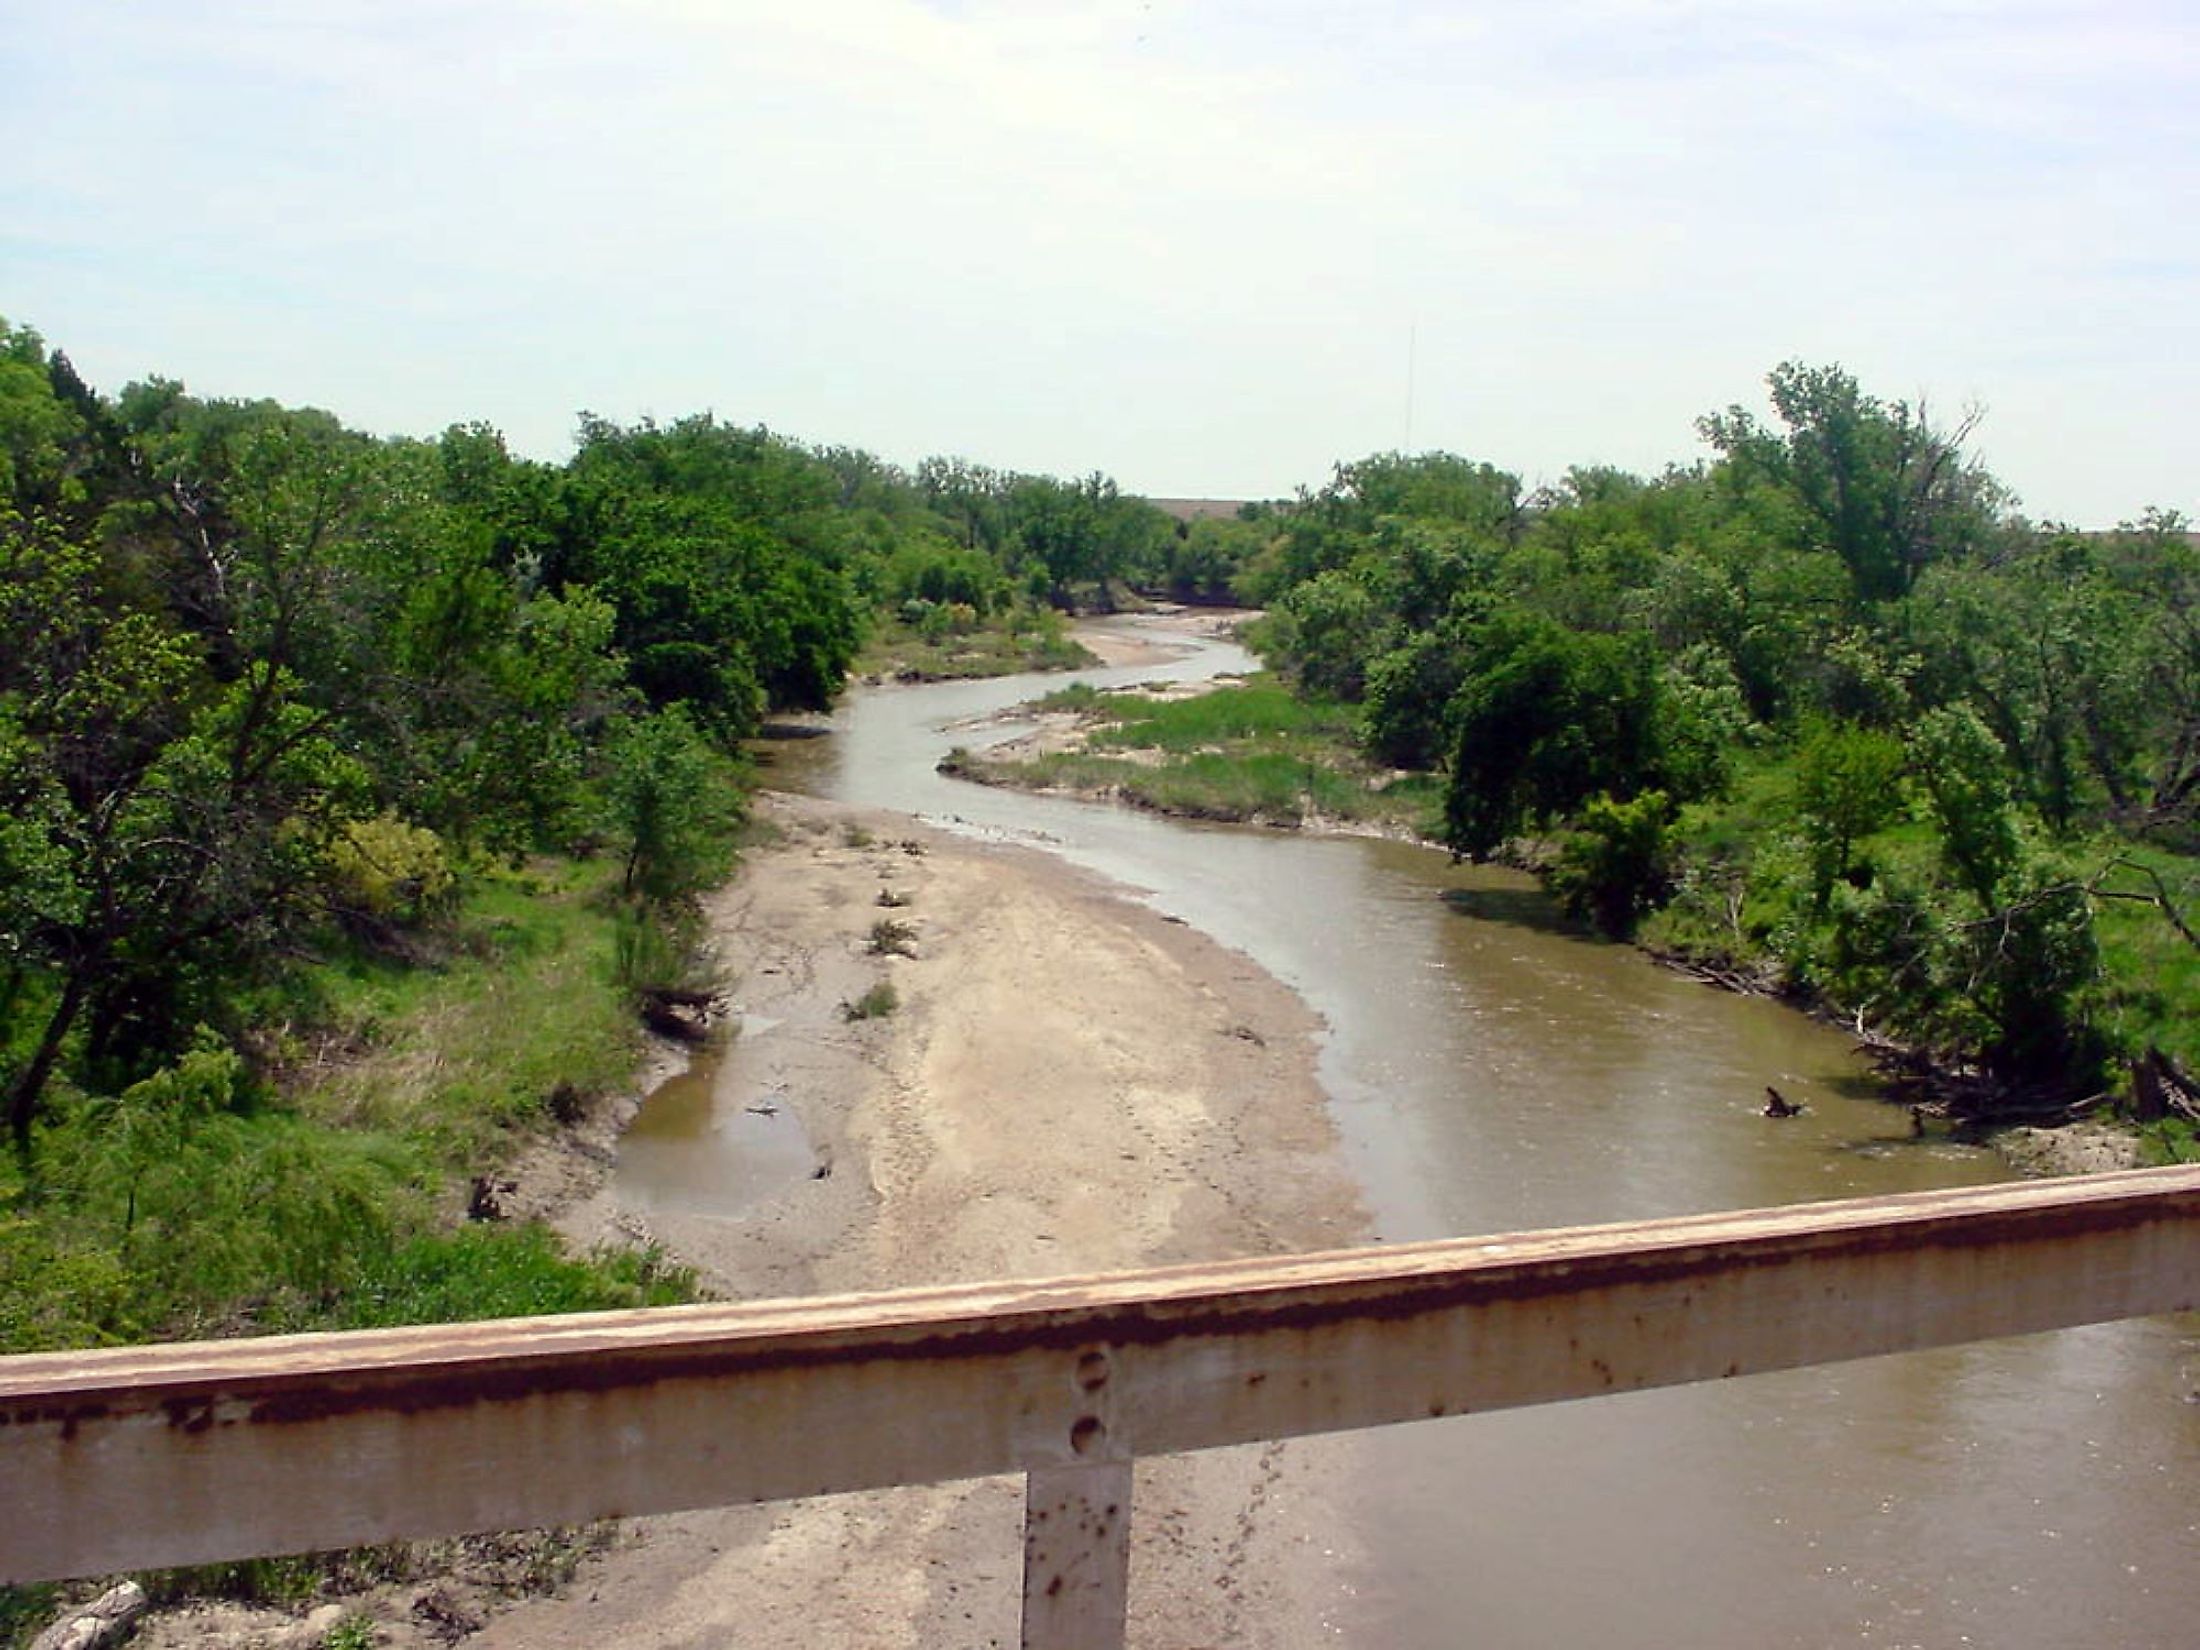 Photo of the Smoky Hill River from a stream gauge station near Assaria, Kansas. Image Credit: National Weather Service, Public domain, via Wikimedia Commons